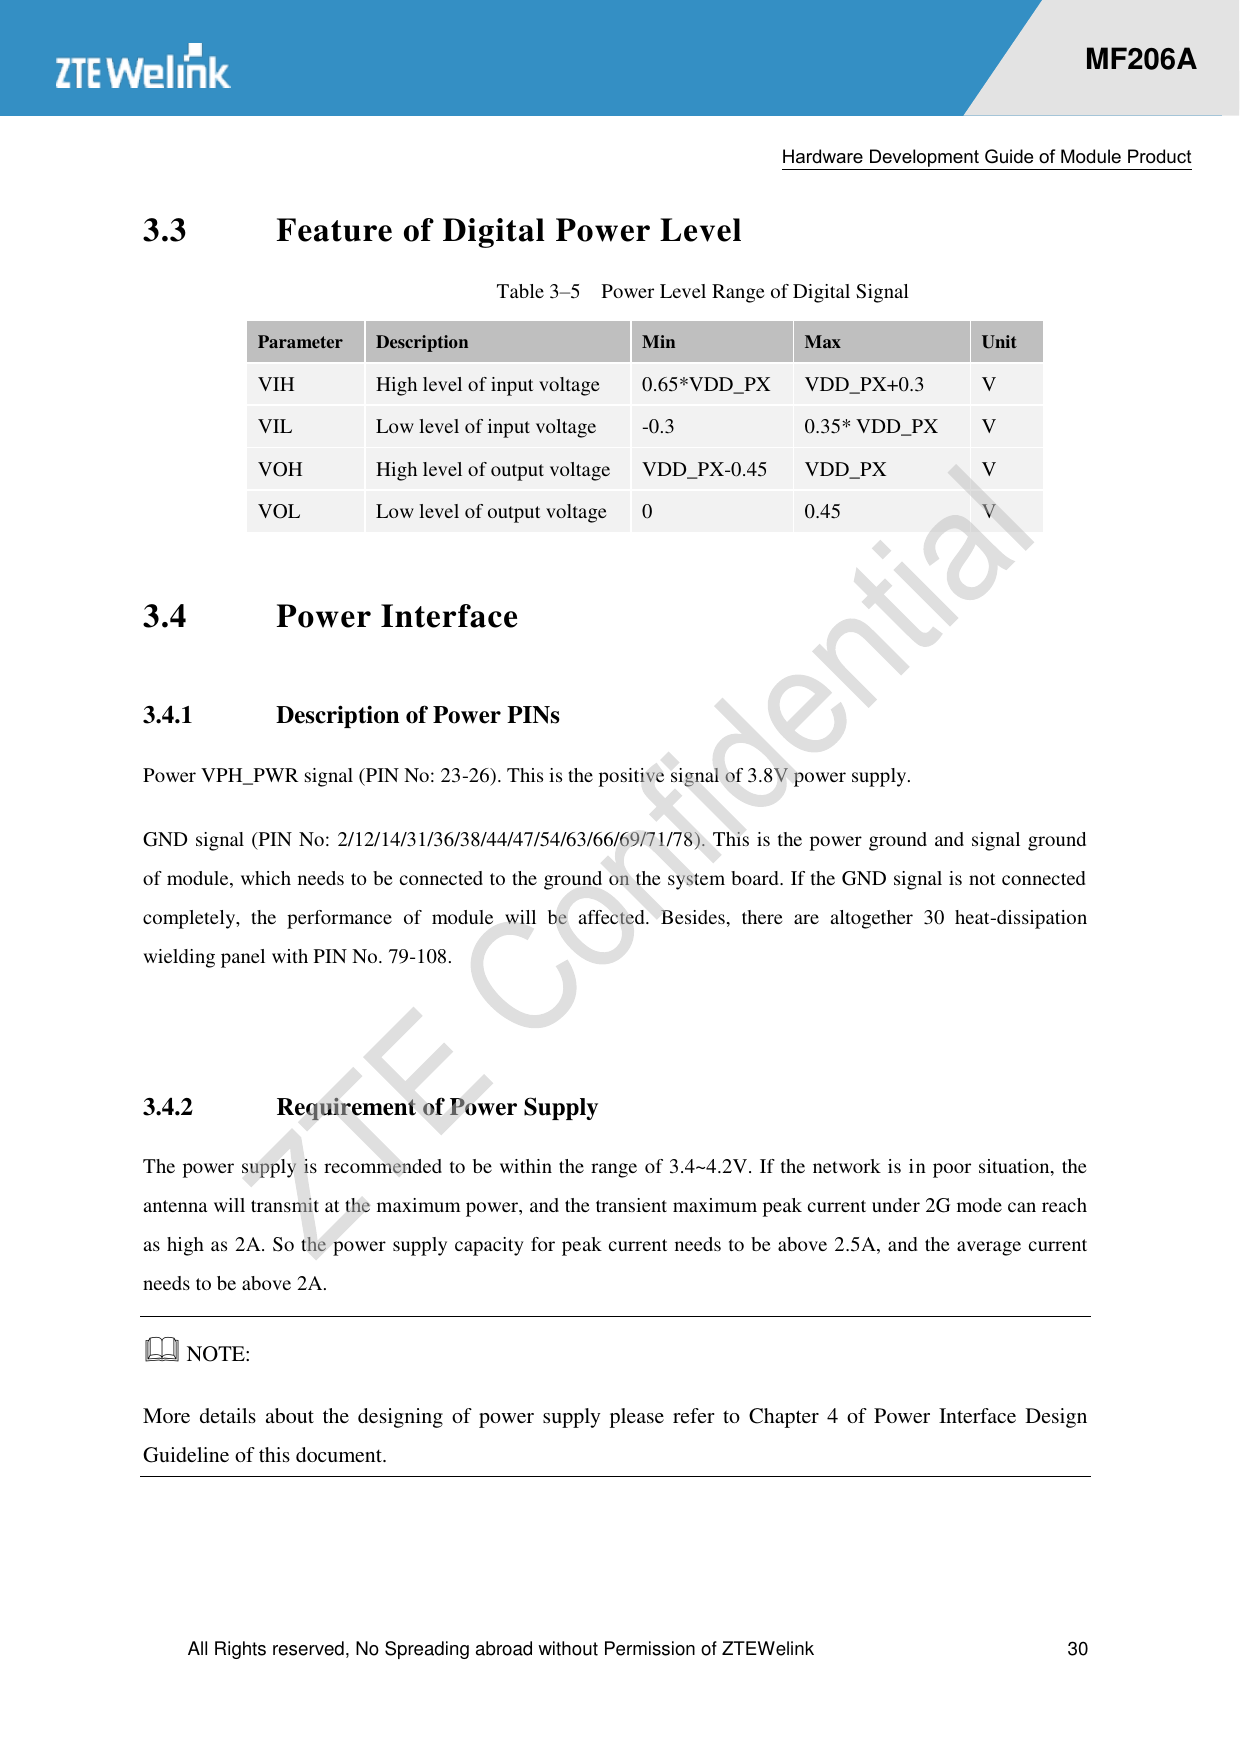  Hardware Development Guide of Module Product  All Rights reserved, No Spreading abroad without Permission of ZTEWelink  30    MF206A 3.3 Feature of Digital Power Level Table 3–5  Power Level Range of Digital Signal Parameter Description Min Max Unit VIH High level of input voltage 0.65*VDD_PX VDD_PX+0.3 V VIL Low level of input voltage -0.3 0.35* VDD_PX V VOH High level of output voltage VDD_PX-0.45 VDD_PX V VOL Low level of output voltage 0 0.45 V 3.4 Power Interface 3.4.1 Description of Power PINs Power VPH_PWR signal (PIN No: 23-26). This is the positive signal of 3.8V power supply.   GND signal (PIN No: 2/12/14/31/36/38/44/47/54/63/66/69/71/78). This is the power ground and signal ground of module, which needs to be connected to the ground on the system board. If the GND signal is not connected completely,  the  performance  of  module  will  be  affected.  Besides,  there  are  altogether  30  heat-dissipation wielding panel with PIN No. 79-108.    3.4.2 Requirement of Power Supply The power supply is recommended to be within the range of 3.4~4.2V. If the network is in poor situation, the antenna will transmit at the maximum power, and the transient maximum peak current under 2G mode can reach as high as 2A. So the power supply capacity for peak current needs to be above 2.5A, and the average current needs to be above 2A.    NOTE:   More details about the designing  of  power supply please  refer to Chapter 4  of  Power Interface Design Guideline of this document.  